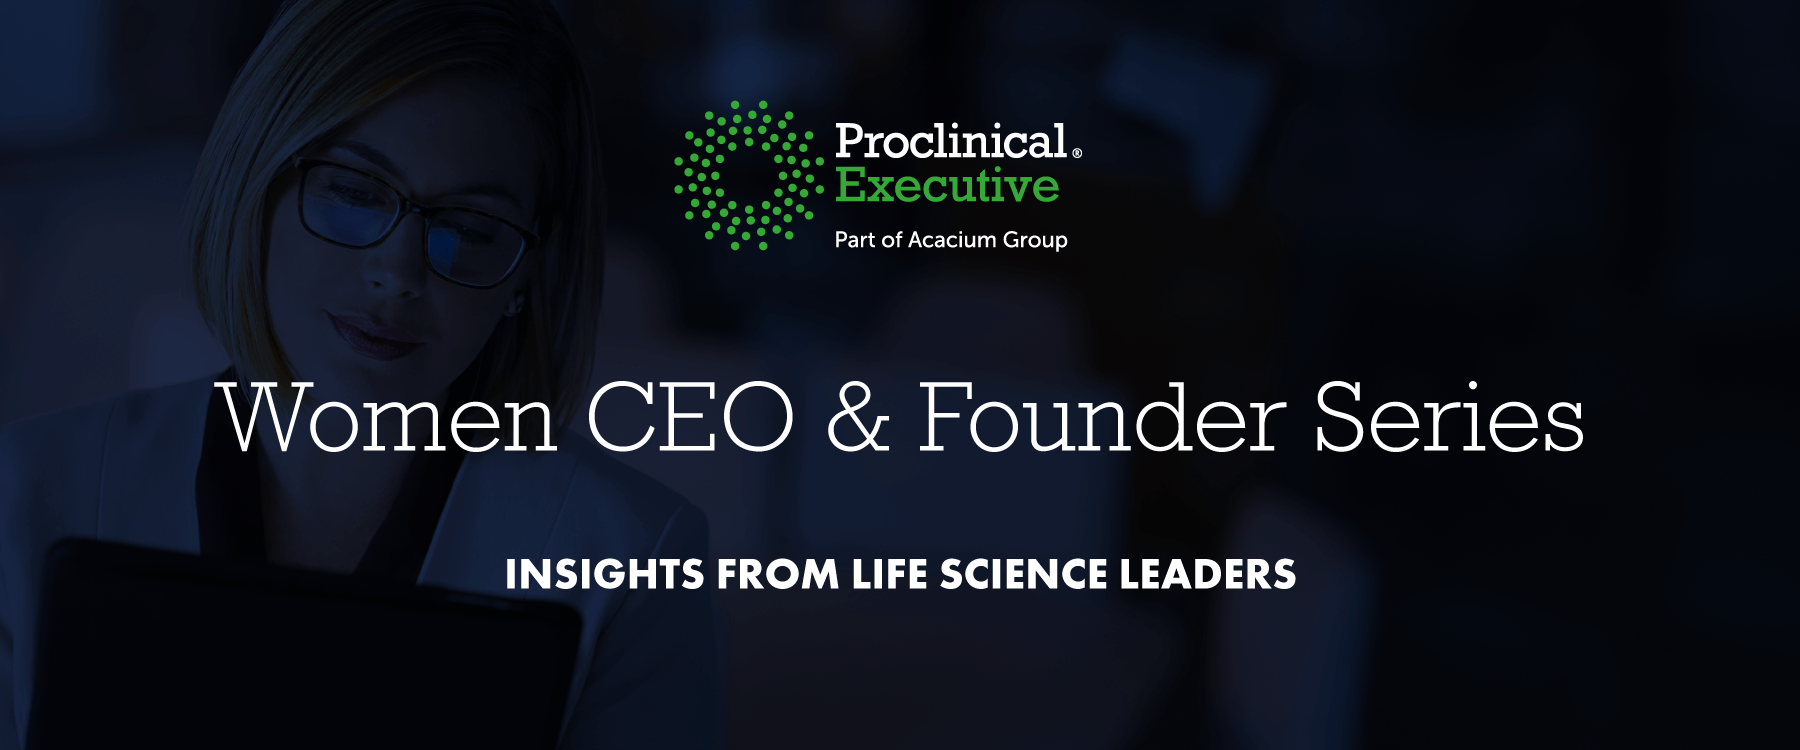 Proclinical Executive - Women CEO & Founder Series - Insights from Life Science Leaders